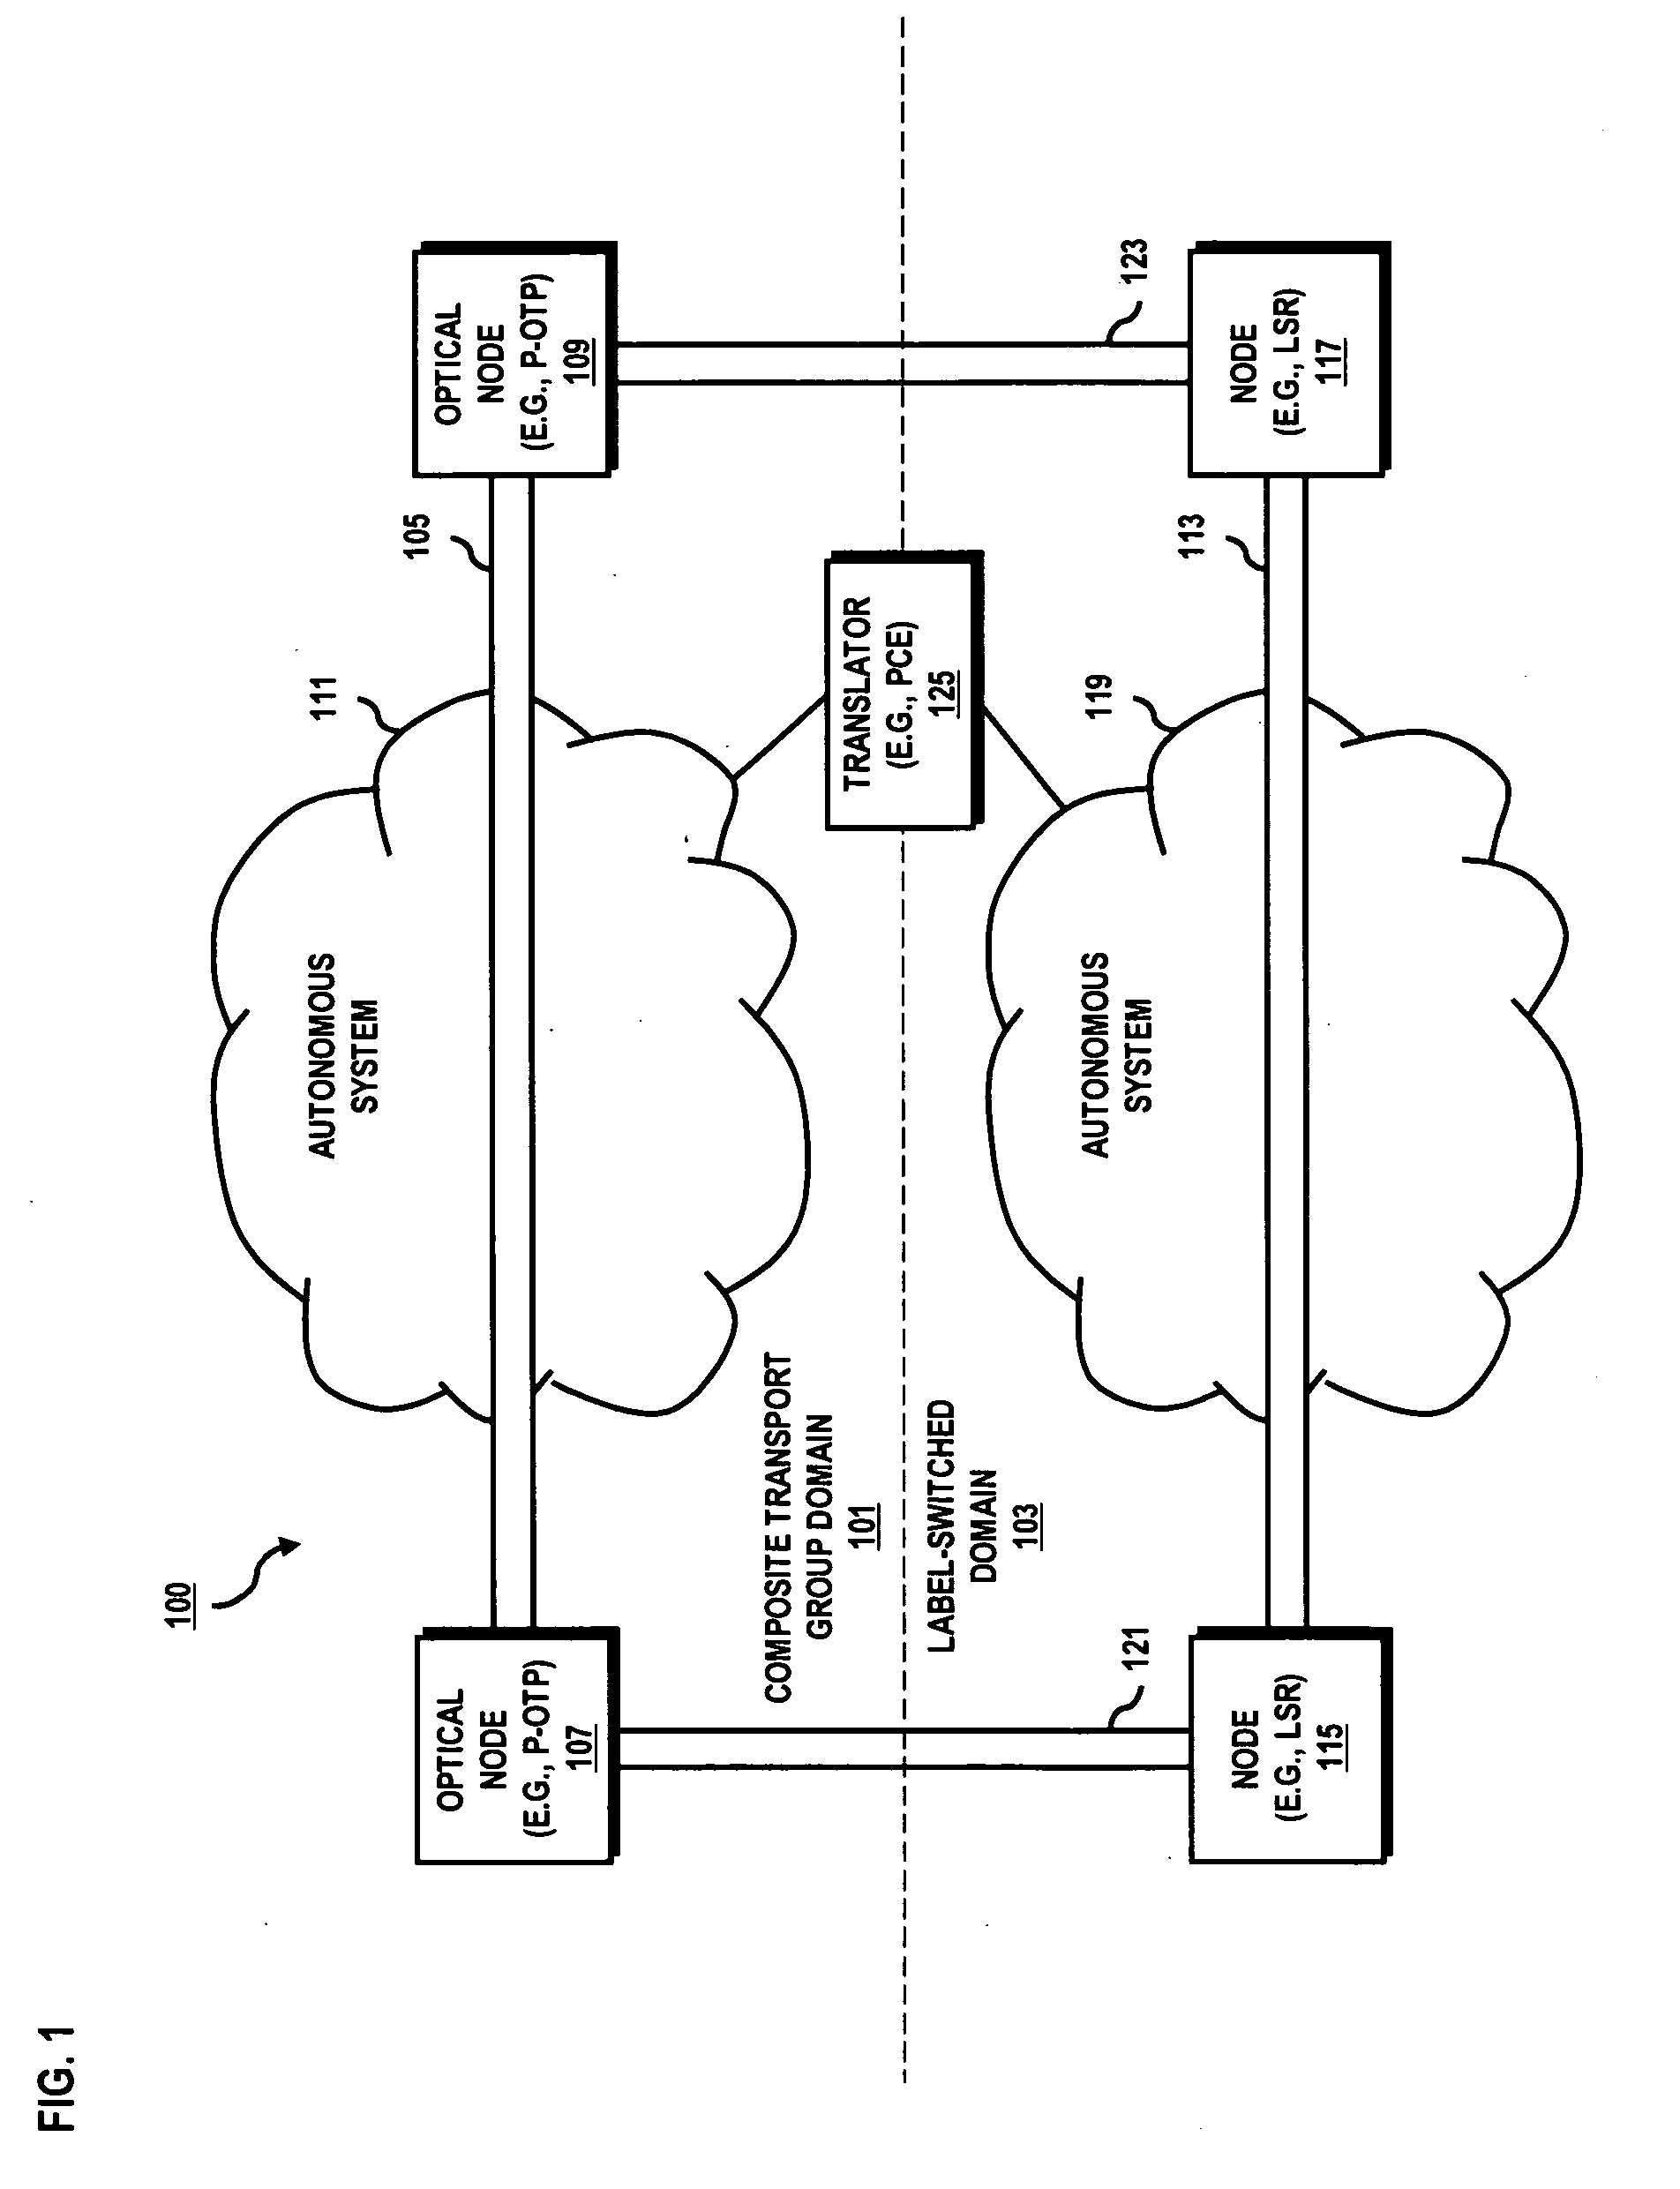 System and method for providing lower-layer path validation for higher-layer autonomous systems